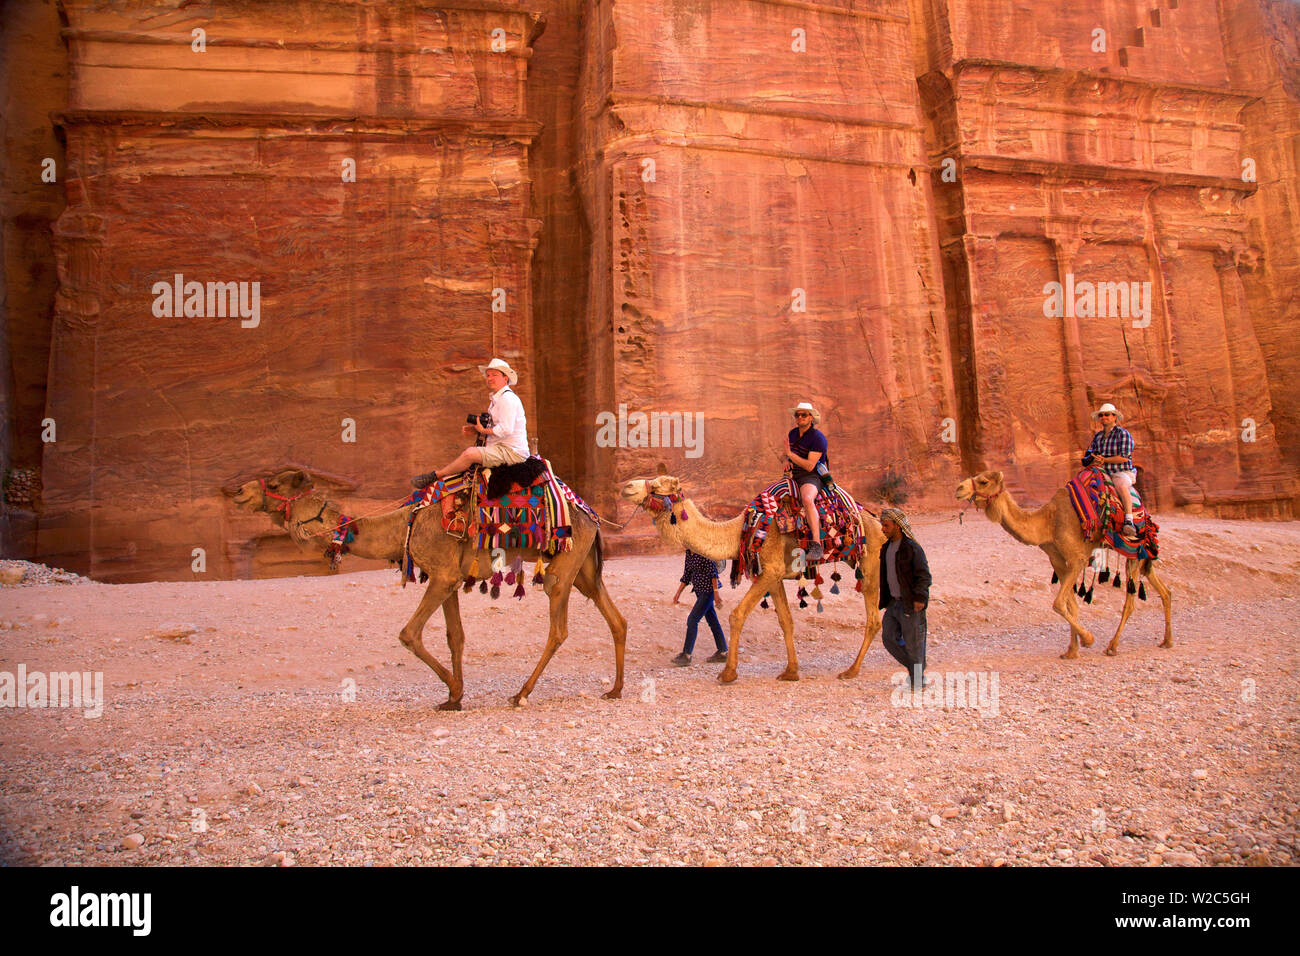 Camels In Front Of The Outer Siq, Petra, Jordan, Middle East Stock Photo